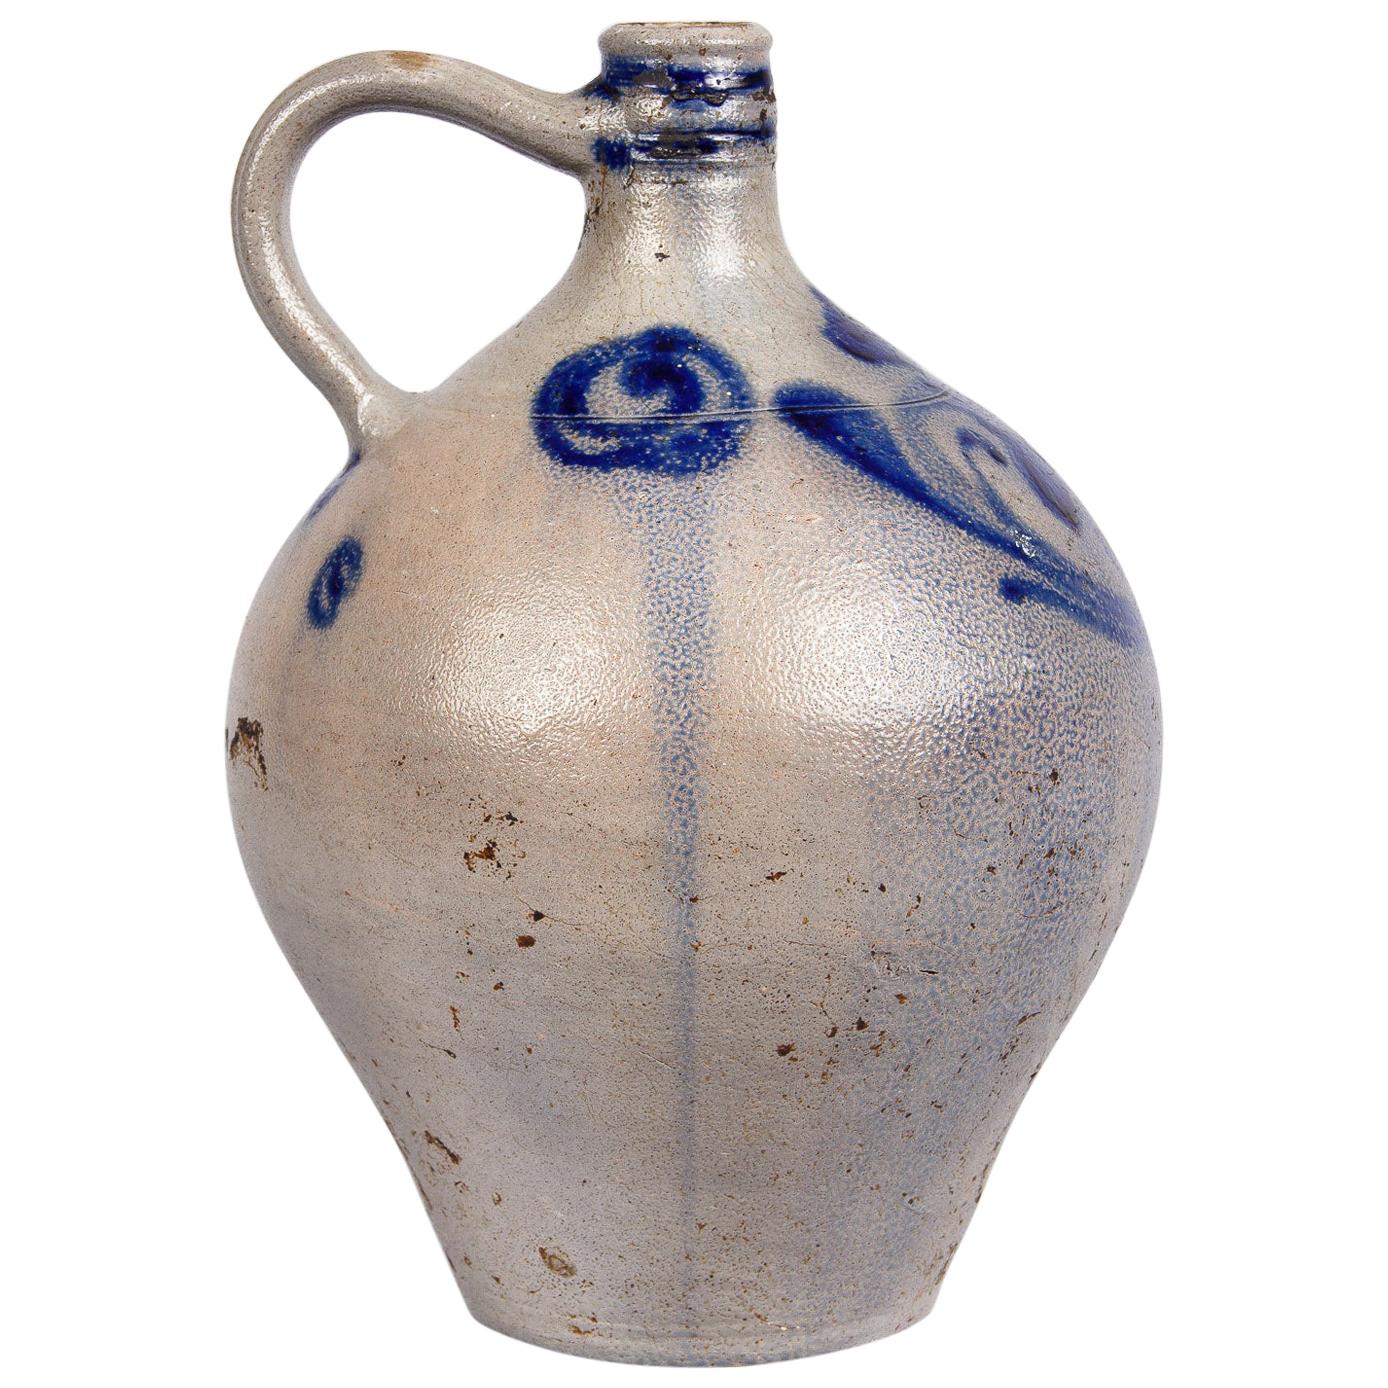 Earthenware Pitcher from Alsace Region, France, 1920s